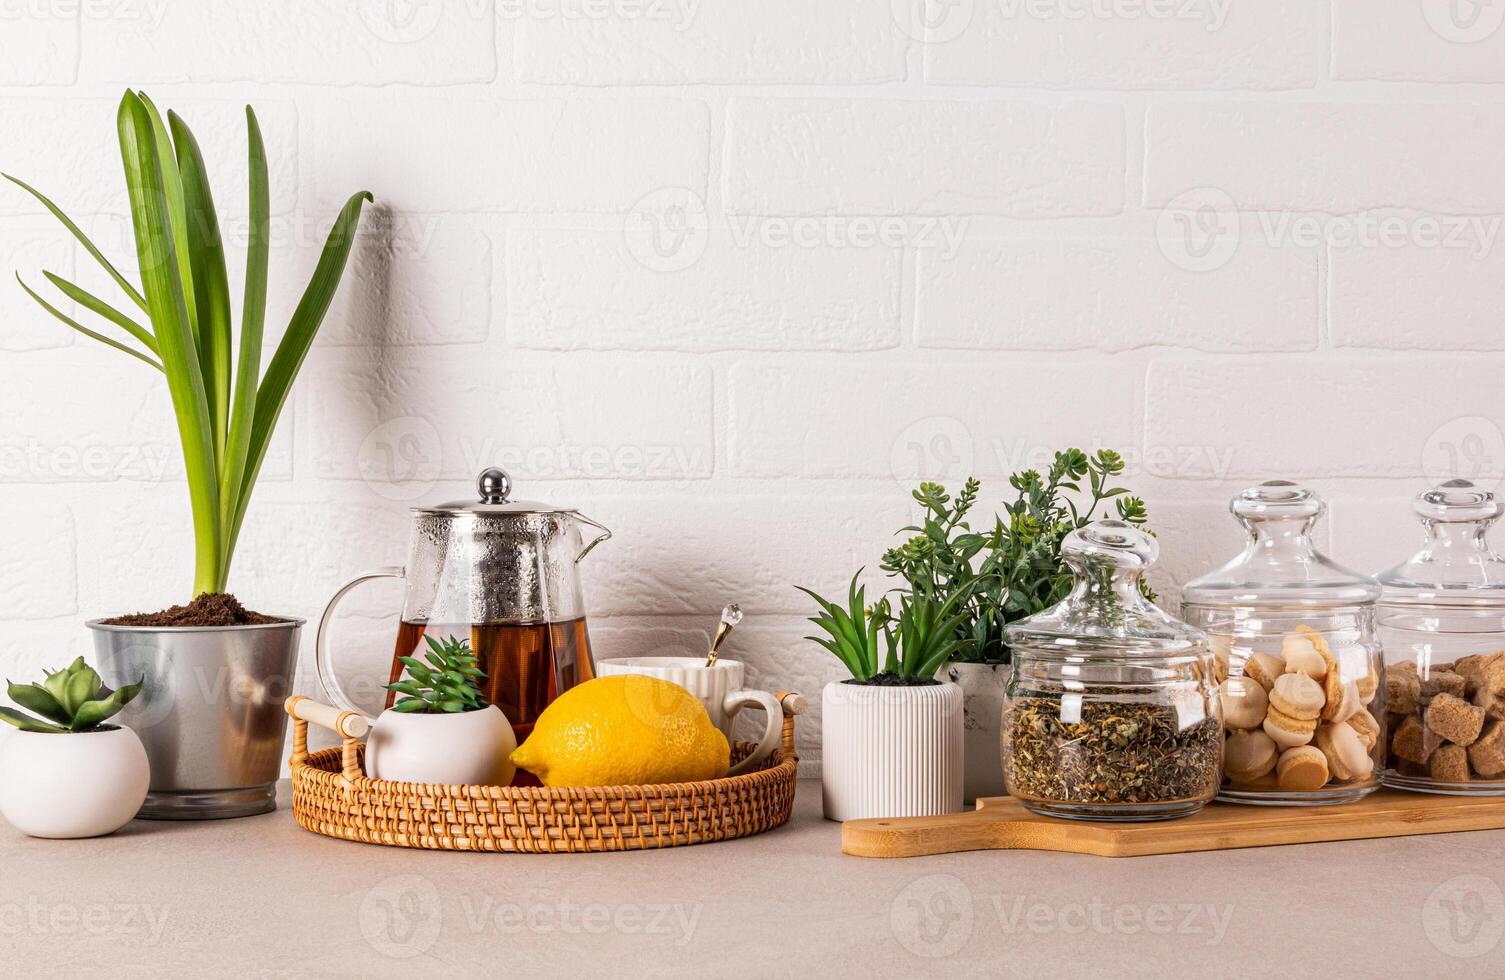 Stylish kitchen background with glass tea pot, lemon, cup, tea jars, sugar, meringue pastry. Green plants in pots. Front view. White brick wall. photo